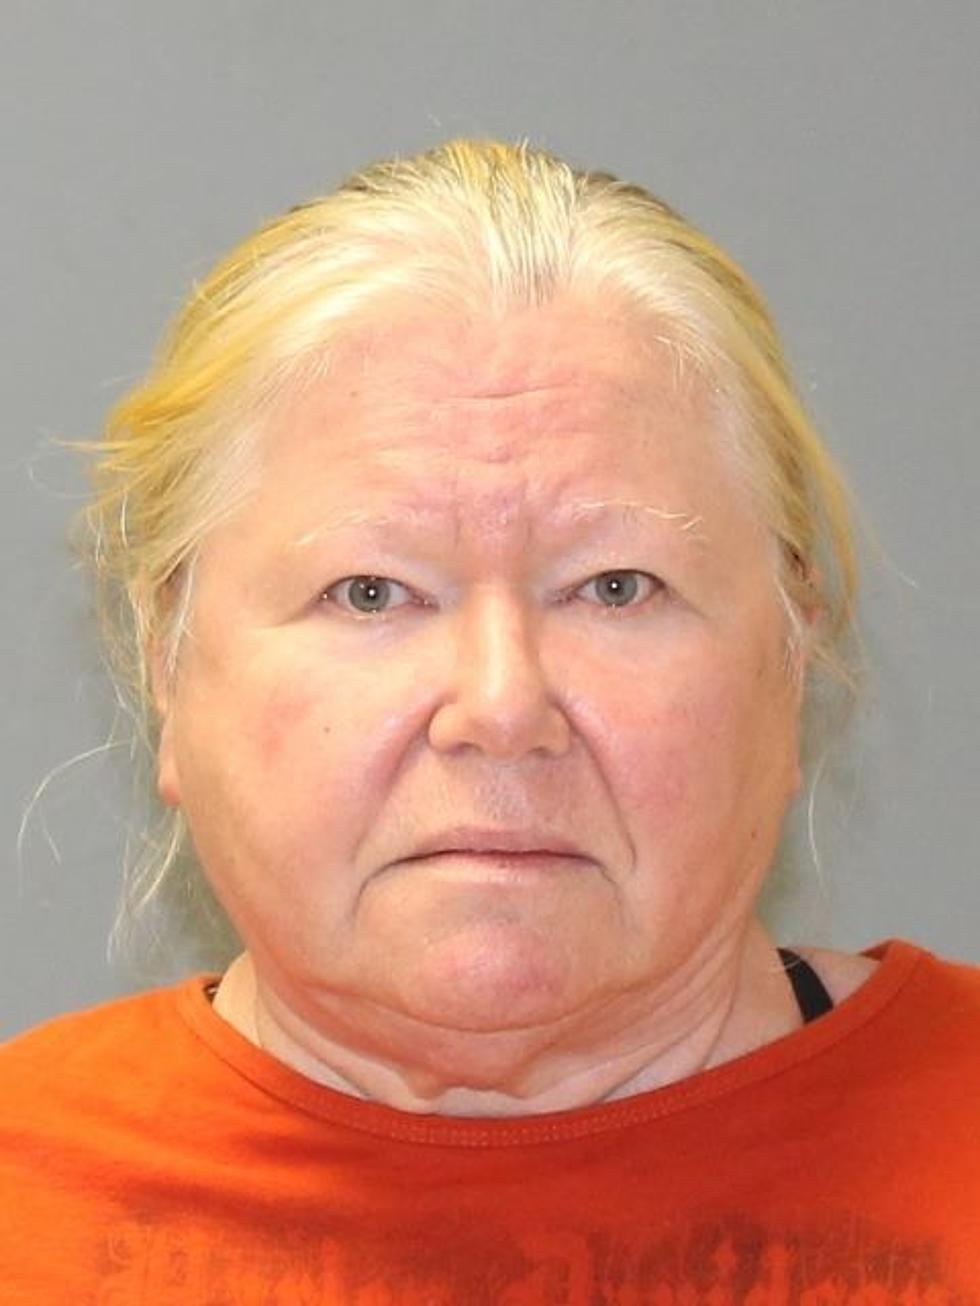 Shamong, NJ woman pleads guilty to death of several dogs in her care living in deplorable conditions